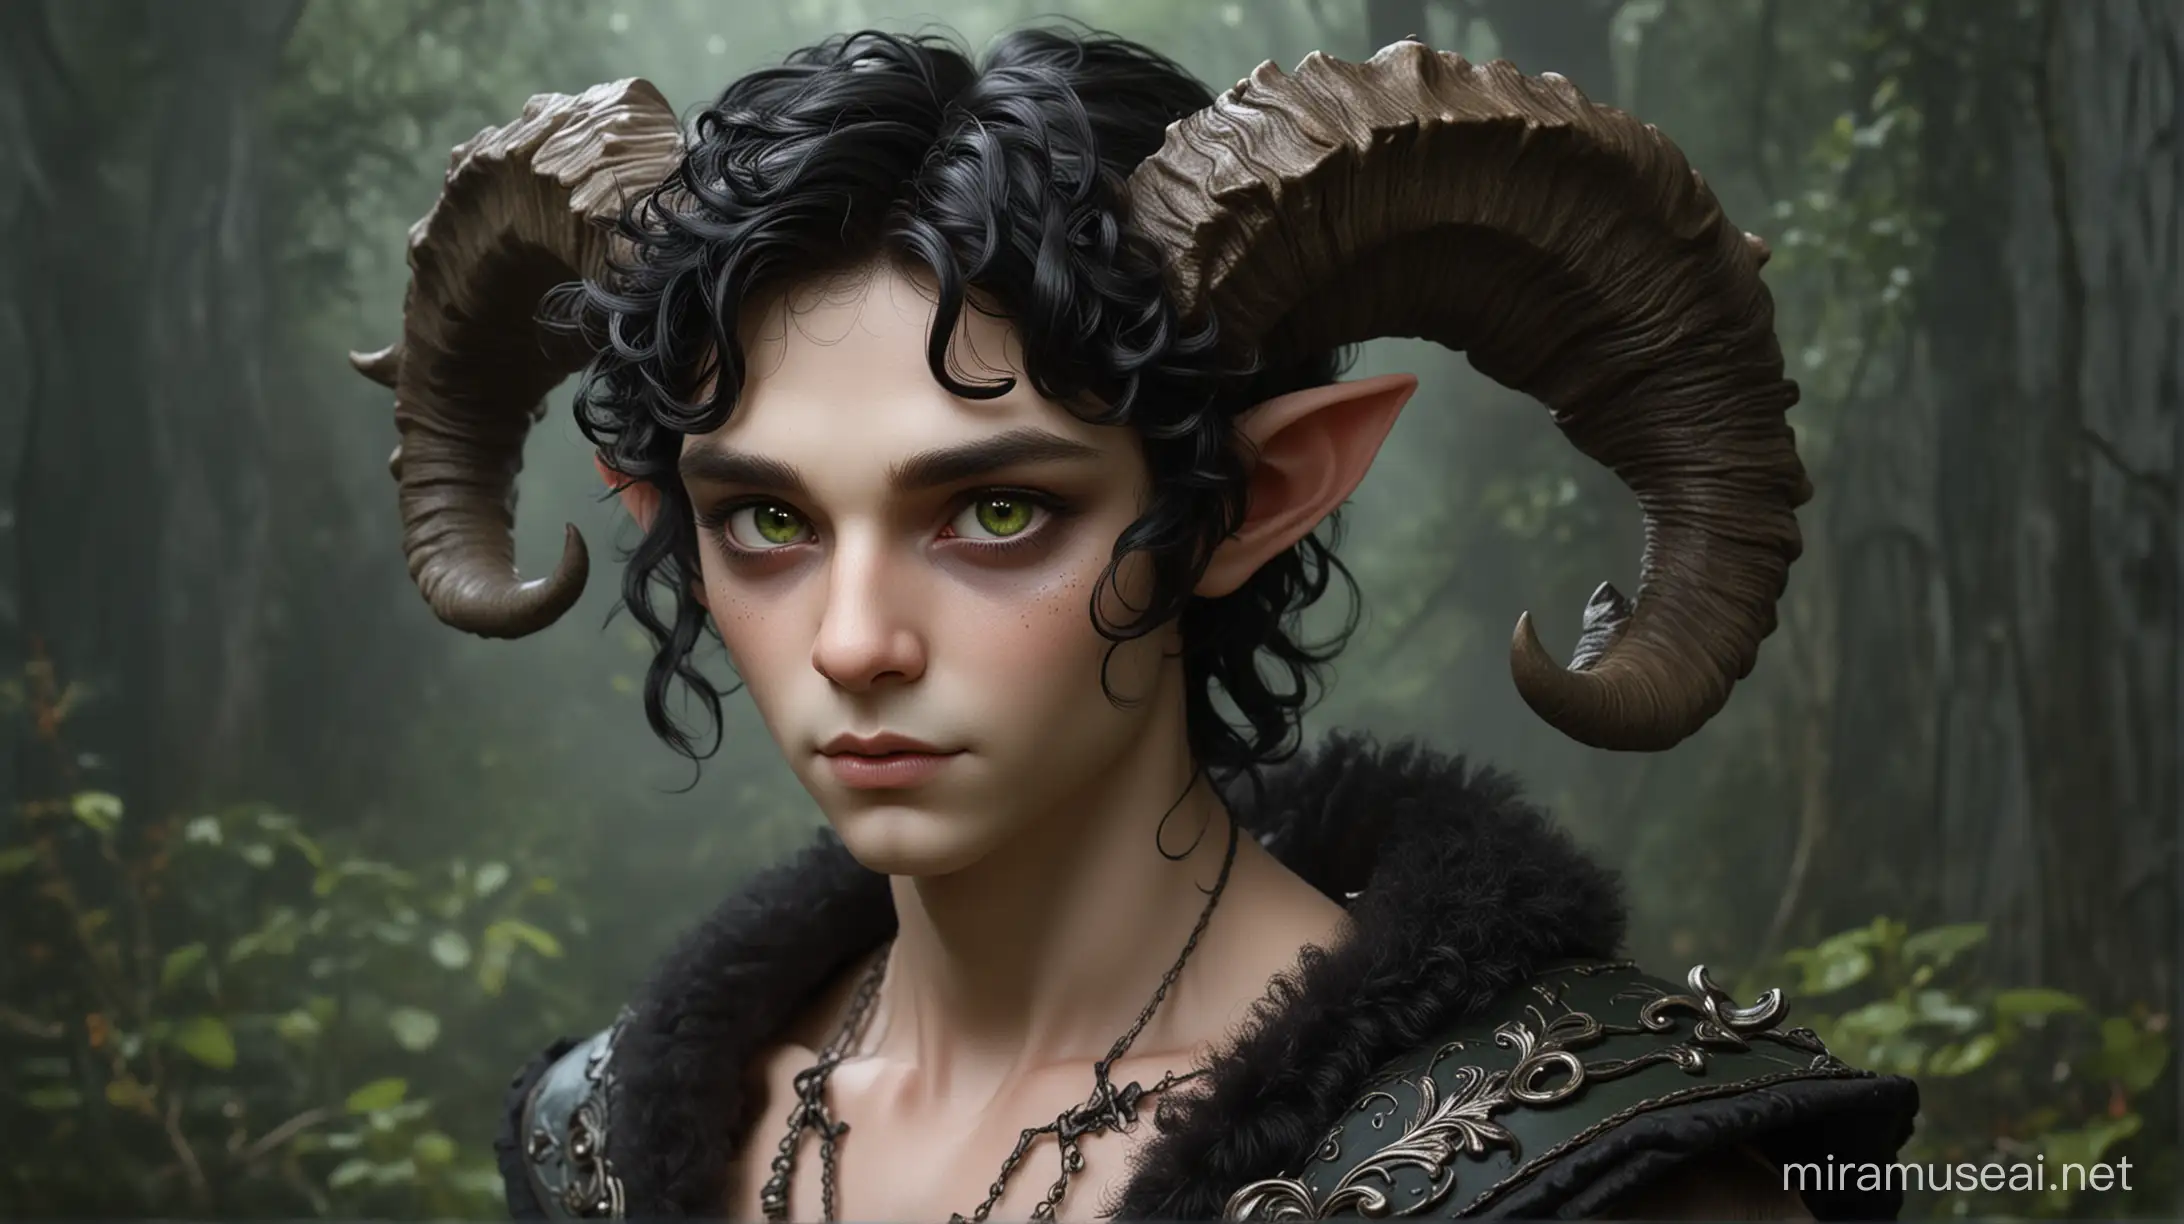 A hansom mythical faun boy with curled horns, a lovely pale face, large green eyes, black hair, he wears black, crimson, and silver of fantasy appearance 